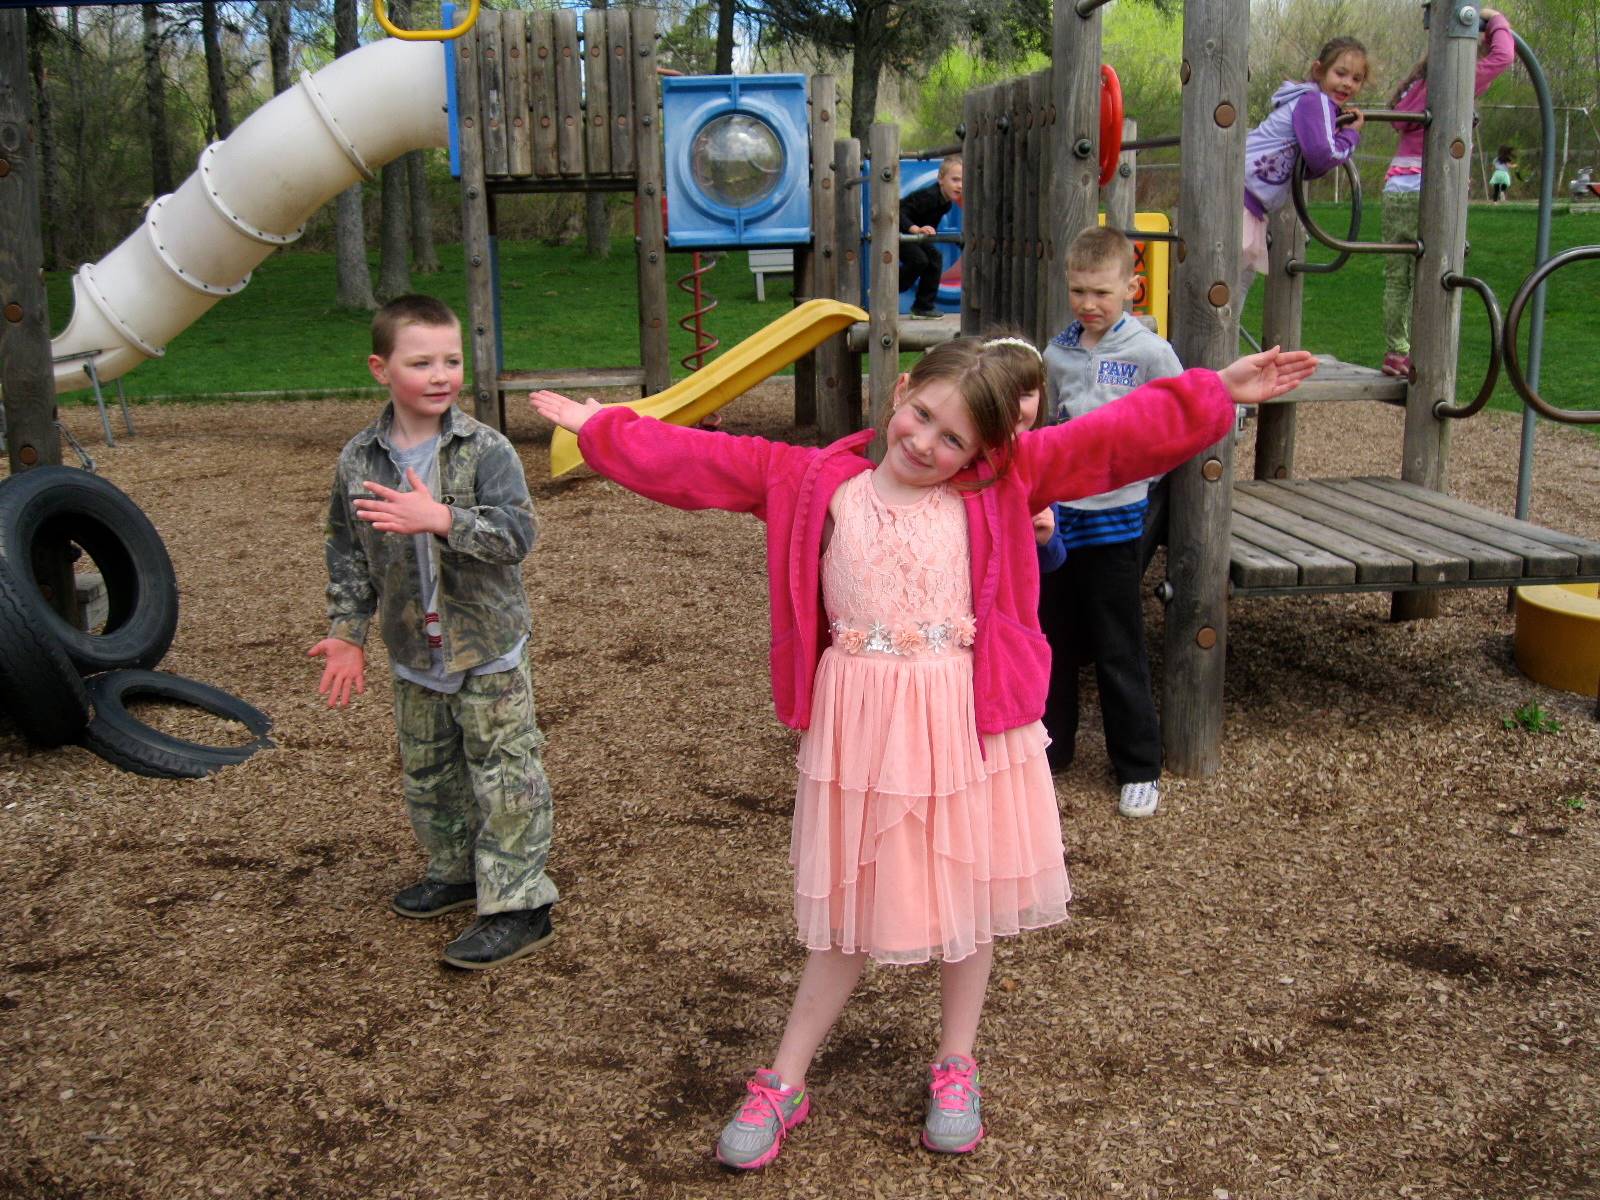 Students play on playground.